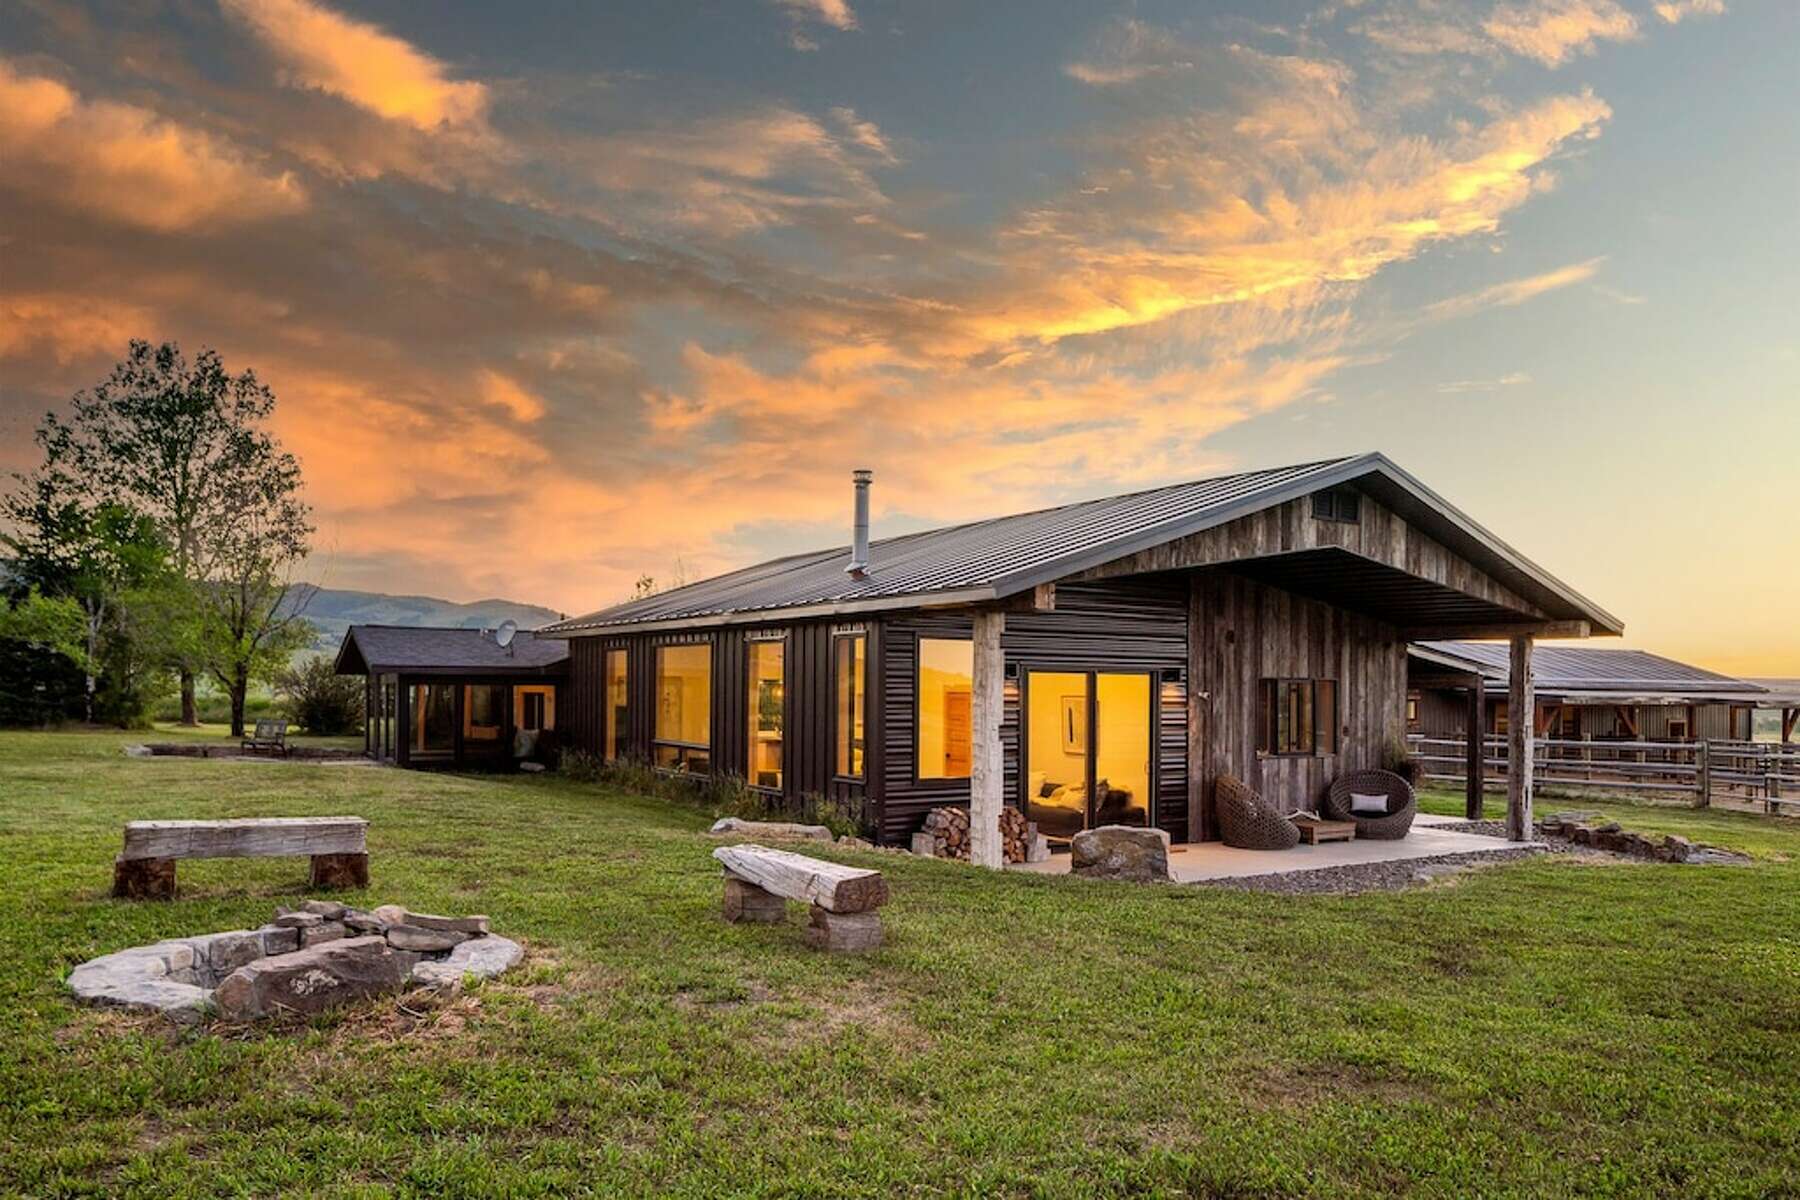 Ranch house rentals to book for a rustic adventure